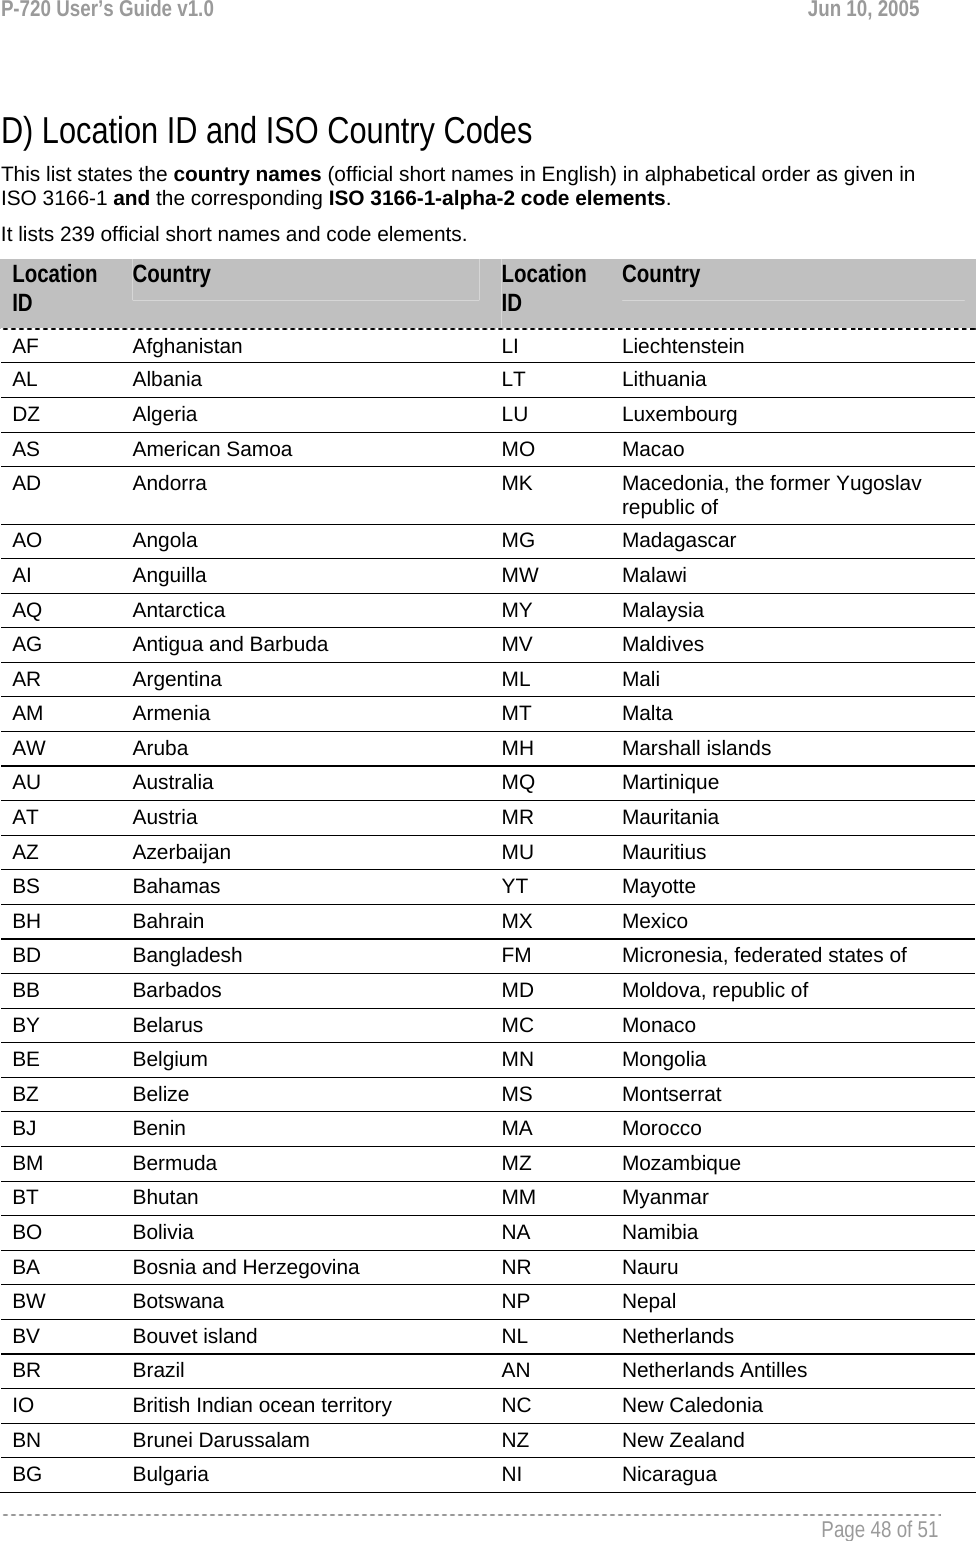 P-720 User’s Guide v1.0  Jun 10, 2005     Page 48 of 51    D) Location ID and ISO Country Codes This list states the country names (official short names in English) in alphabetical order as given in ISO 3166-1 and the corresponding ISO 3166-1-alpha-2 code elements.  It lists 239 official short names and code elements. Location ID  Country  Location ID  Country AF  Afghanistan  LI  Liechtenstein AL  Albania  LT  Lithuania DZ  Algeria  LU  Luxembourg AS  American Samoa  MO  Macao AD  Andorra  MK  Macedonia, the former Yugoslav republic of AO  Angola  MG  Madagascar AI  Anguilla  MW  Malawi AQ  Antarctica  MY  Malaysia AG  Antigua and Barbuda  MV  Maldives AR  Argentina  ML  Mali AM  Armenia  MT  Malta AW  Aruba  MH  Marshall islands AU  Australia  MQ  Martinique AT  Austria  MR  Mauritania AZ  Azerbaijan  MU  Mauritius BS  Bahamas  YT  Mayotte BH  Bahrain  MX  Mexico BD  Bangladesh  FM  Micronesia, federated states of BB  Barbados  MD  Moldova, republic of BY  Belarus  MC  Monaco BE  Belgium  MN  Mongolia BZ  Belize  MS  Montserrat BJ  Benin  MA  Morocco BM  Bermuda  MZ  Mozambique BT  Bhutan  MM  Myanmar BO  Bolivia  NA  Namibia BA  Bosnia and Herzegovina  NR  Nauru BW  Botswana  NP  Nepal BV  Bouvet island  NL  Netherlands BR  Brazil  AN  Netherlands Antilles IO  British Indian ocean territory  NC  New Caledonia BN  Brunei Darussalam  NZ  New Zealand BG  Bulgaria  NI  Nicaragua 